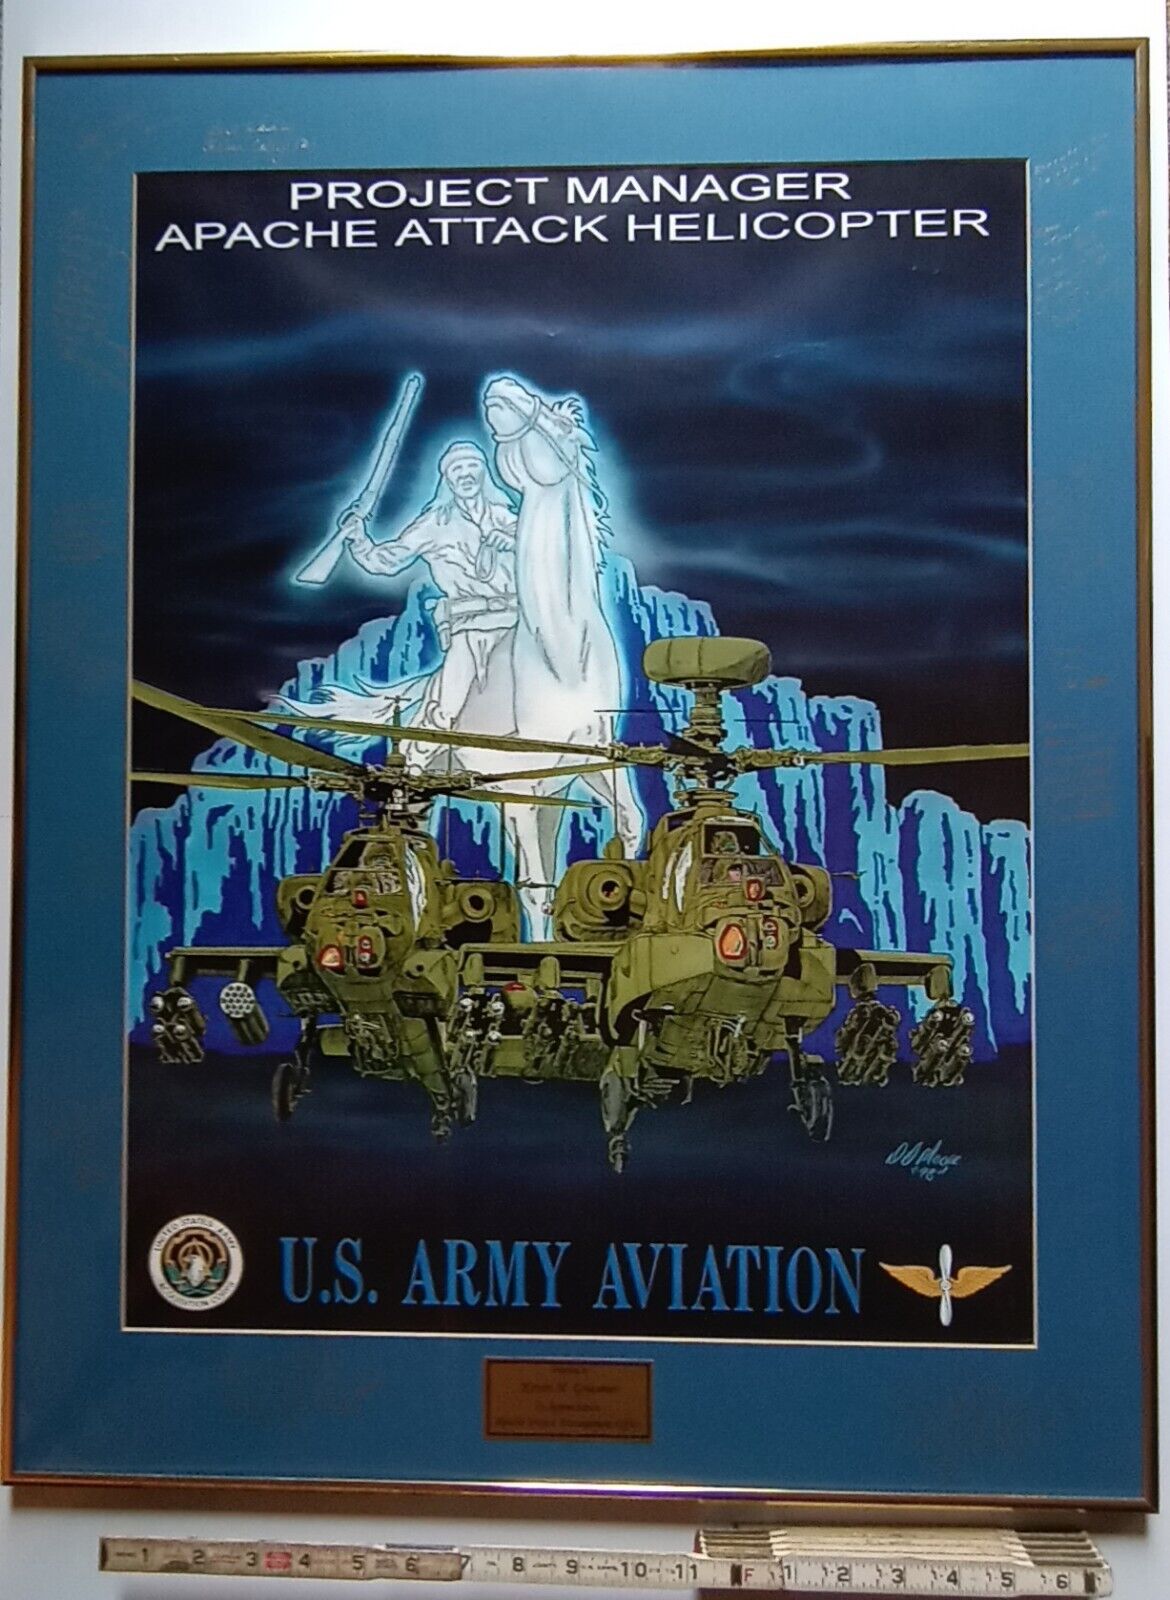 c1999 Apache Attack Helicopter Manager US Army Aviation Framed Poster Award U.S.